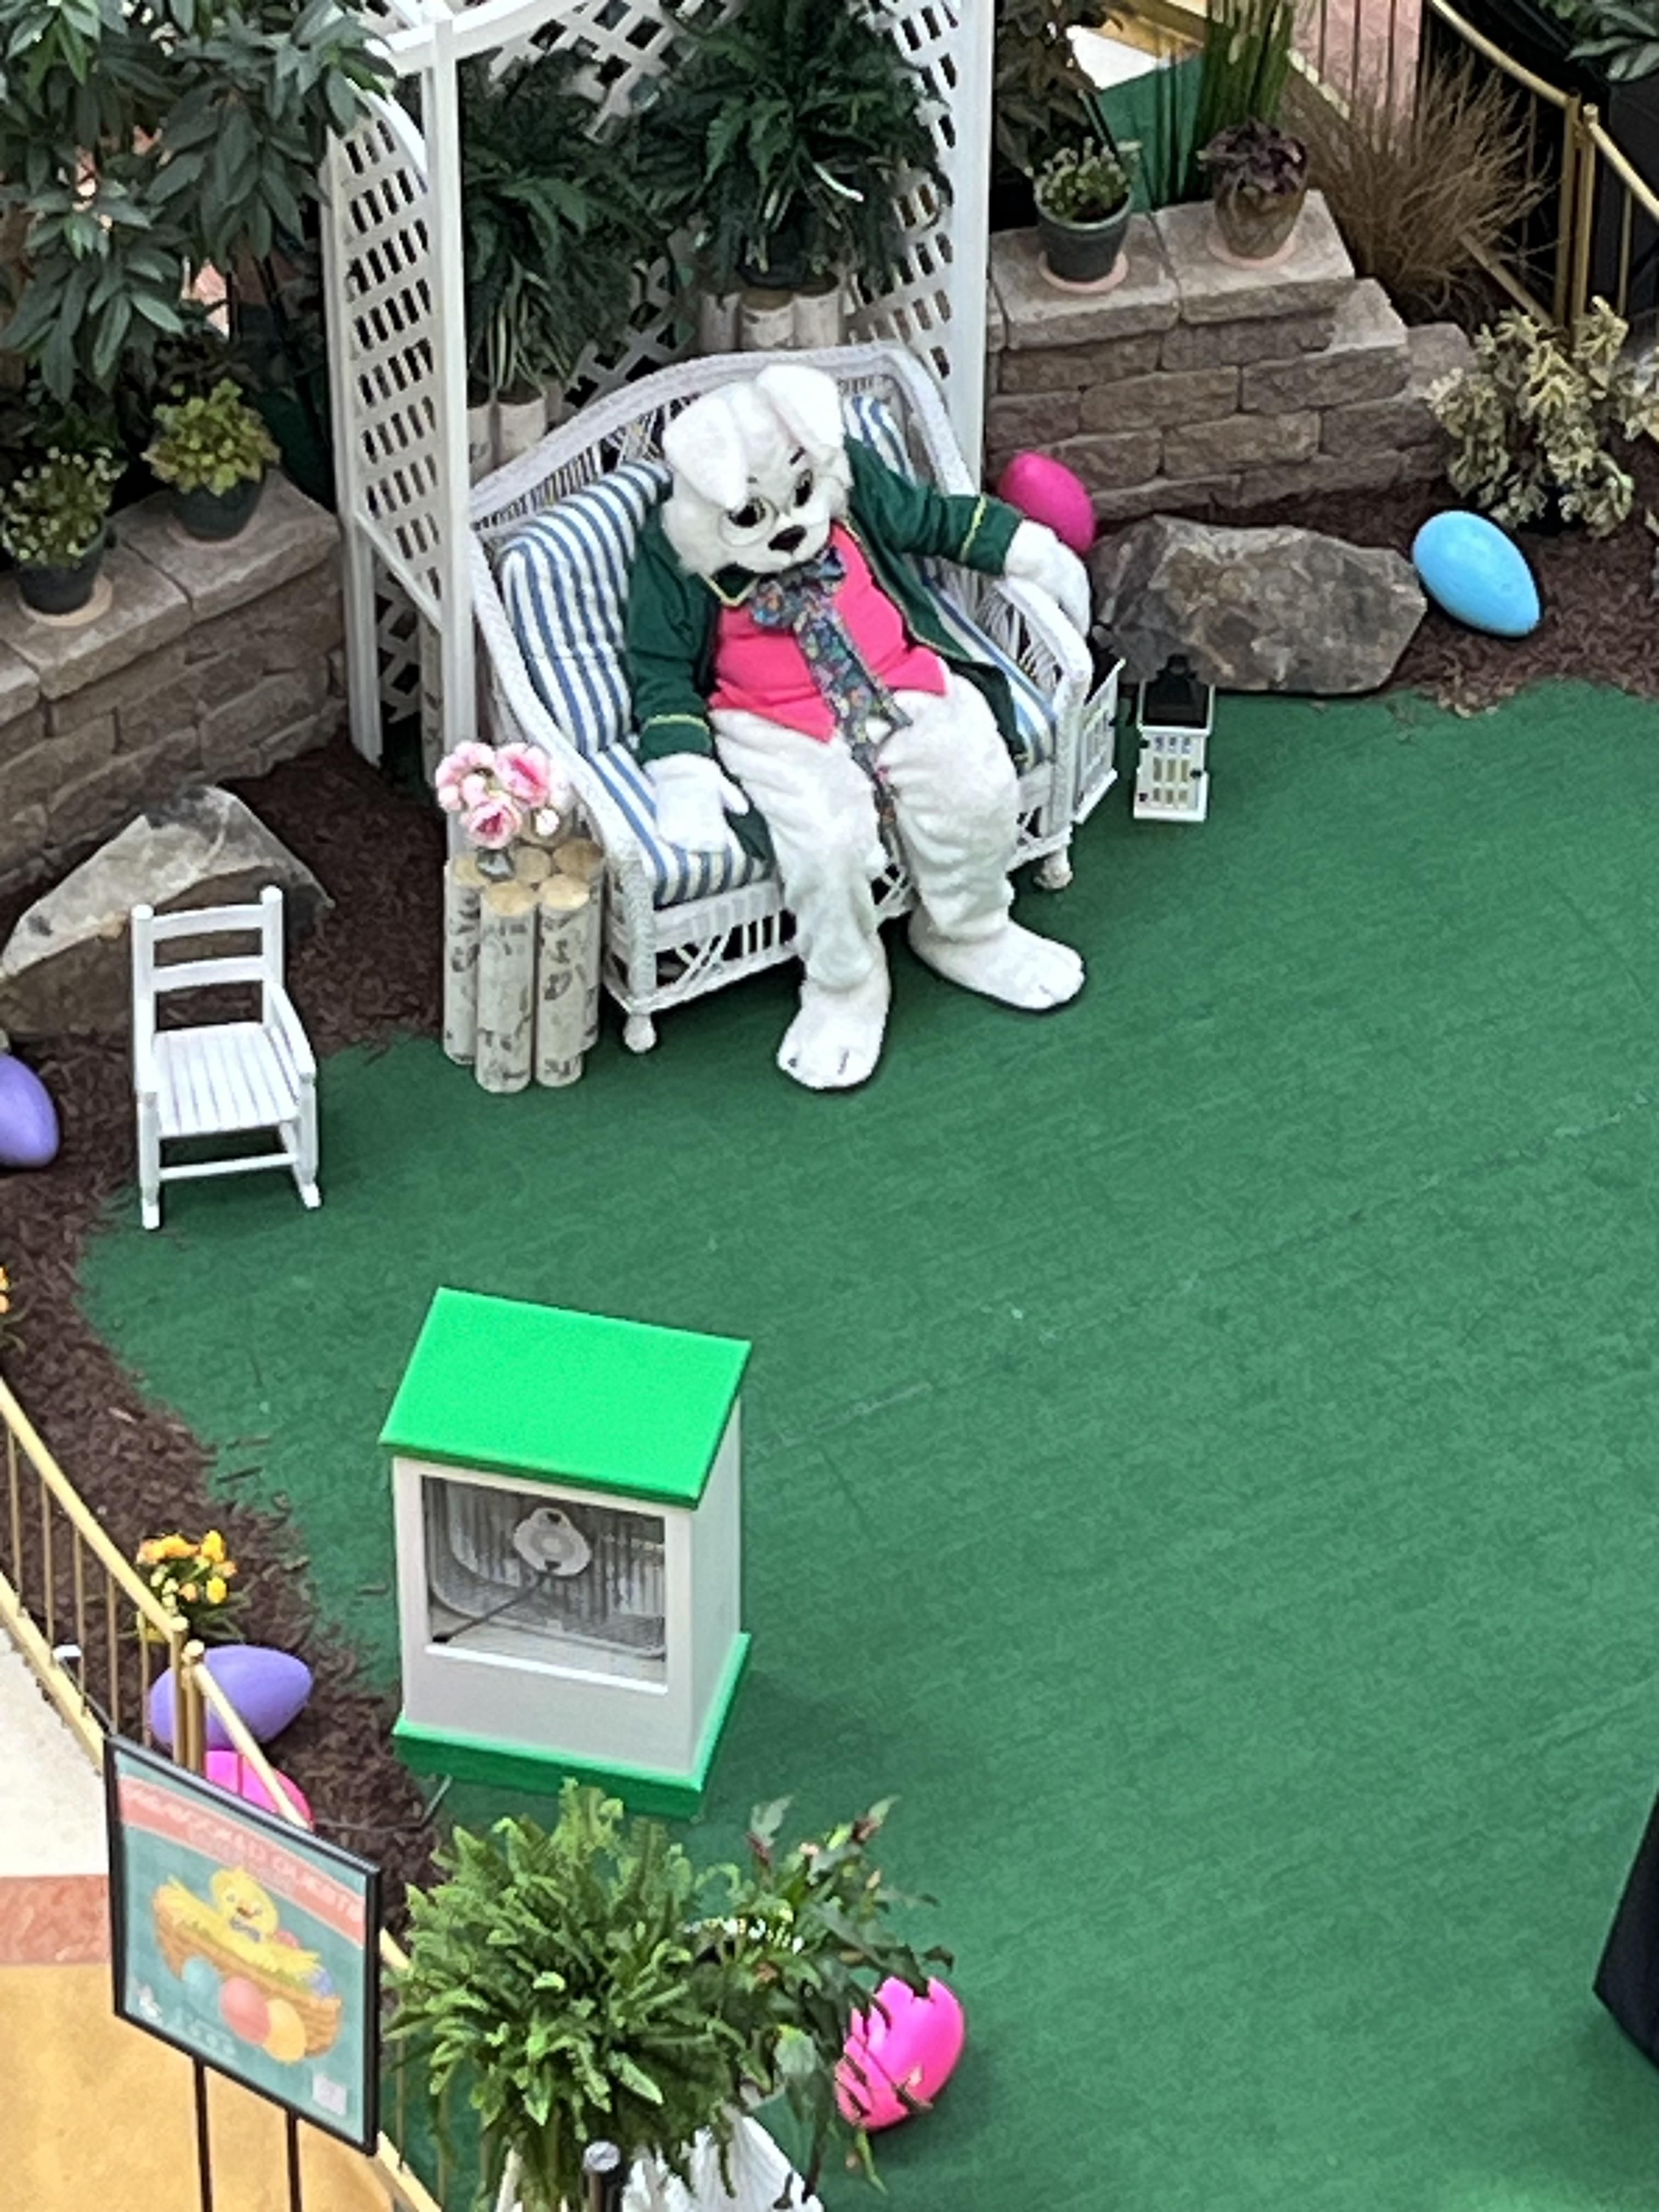 The Easter Bunny was at the mall today, appears unenthused.